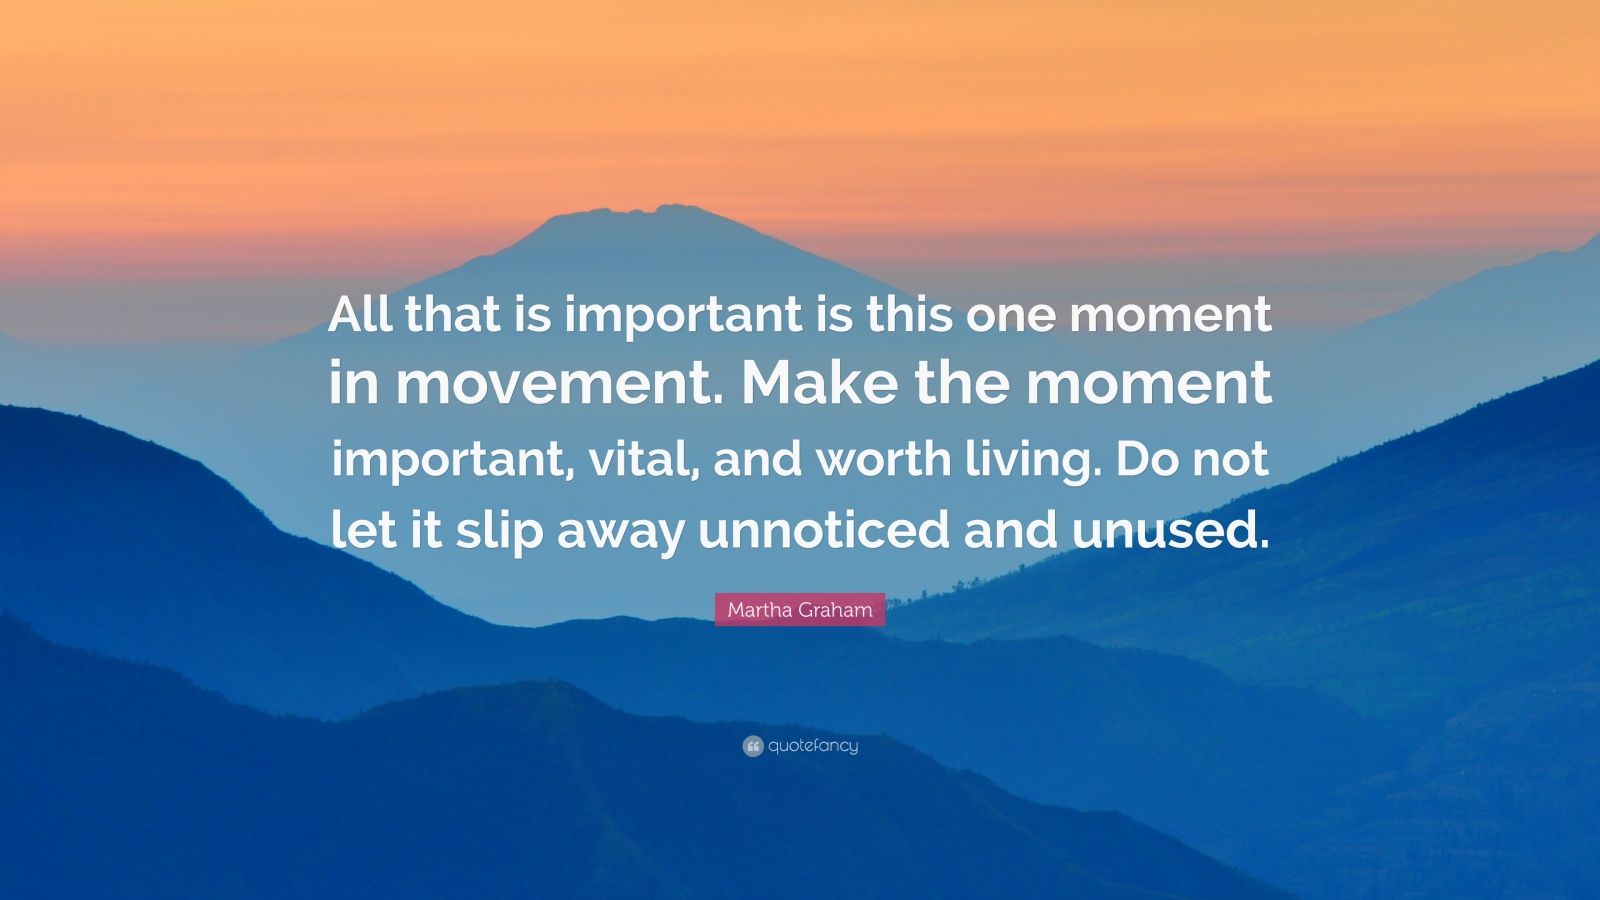 Martha Graham Quote: “All that is important is this one moment in